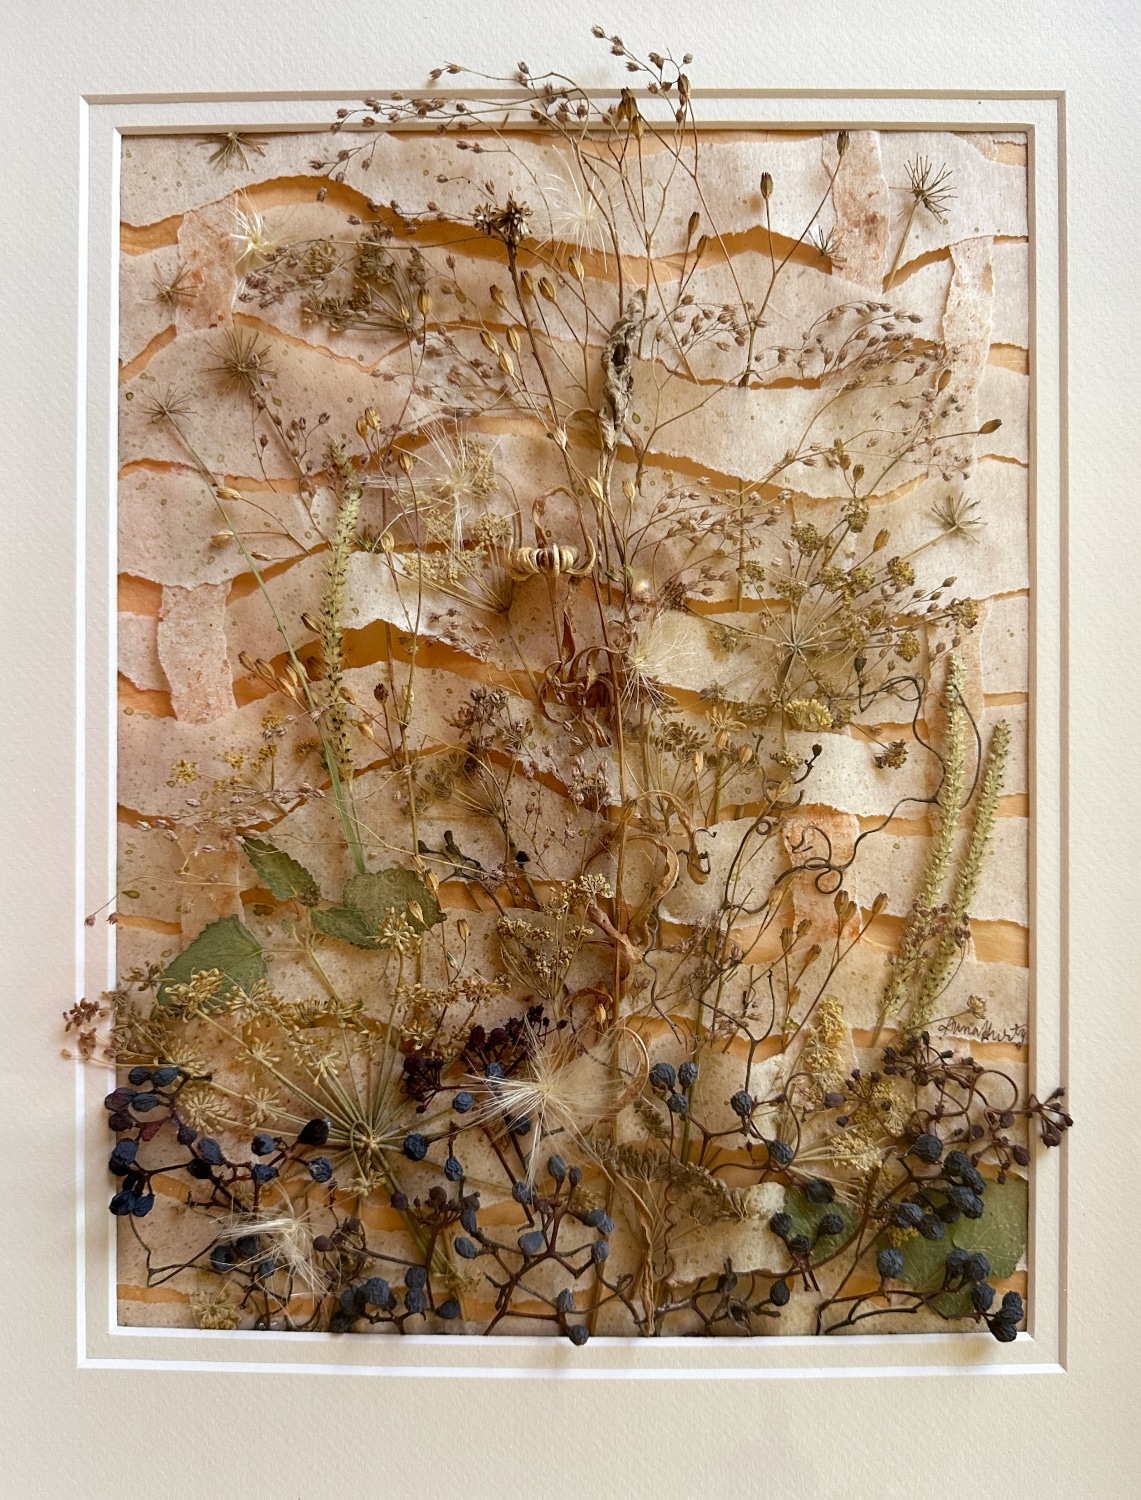 watercolor, torn paper, and assembled dried plants :: $180.00